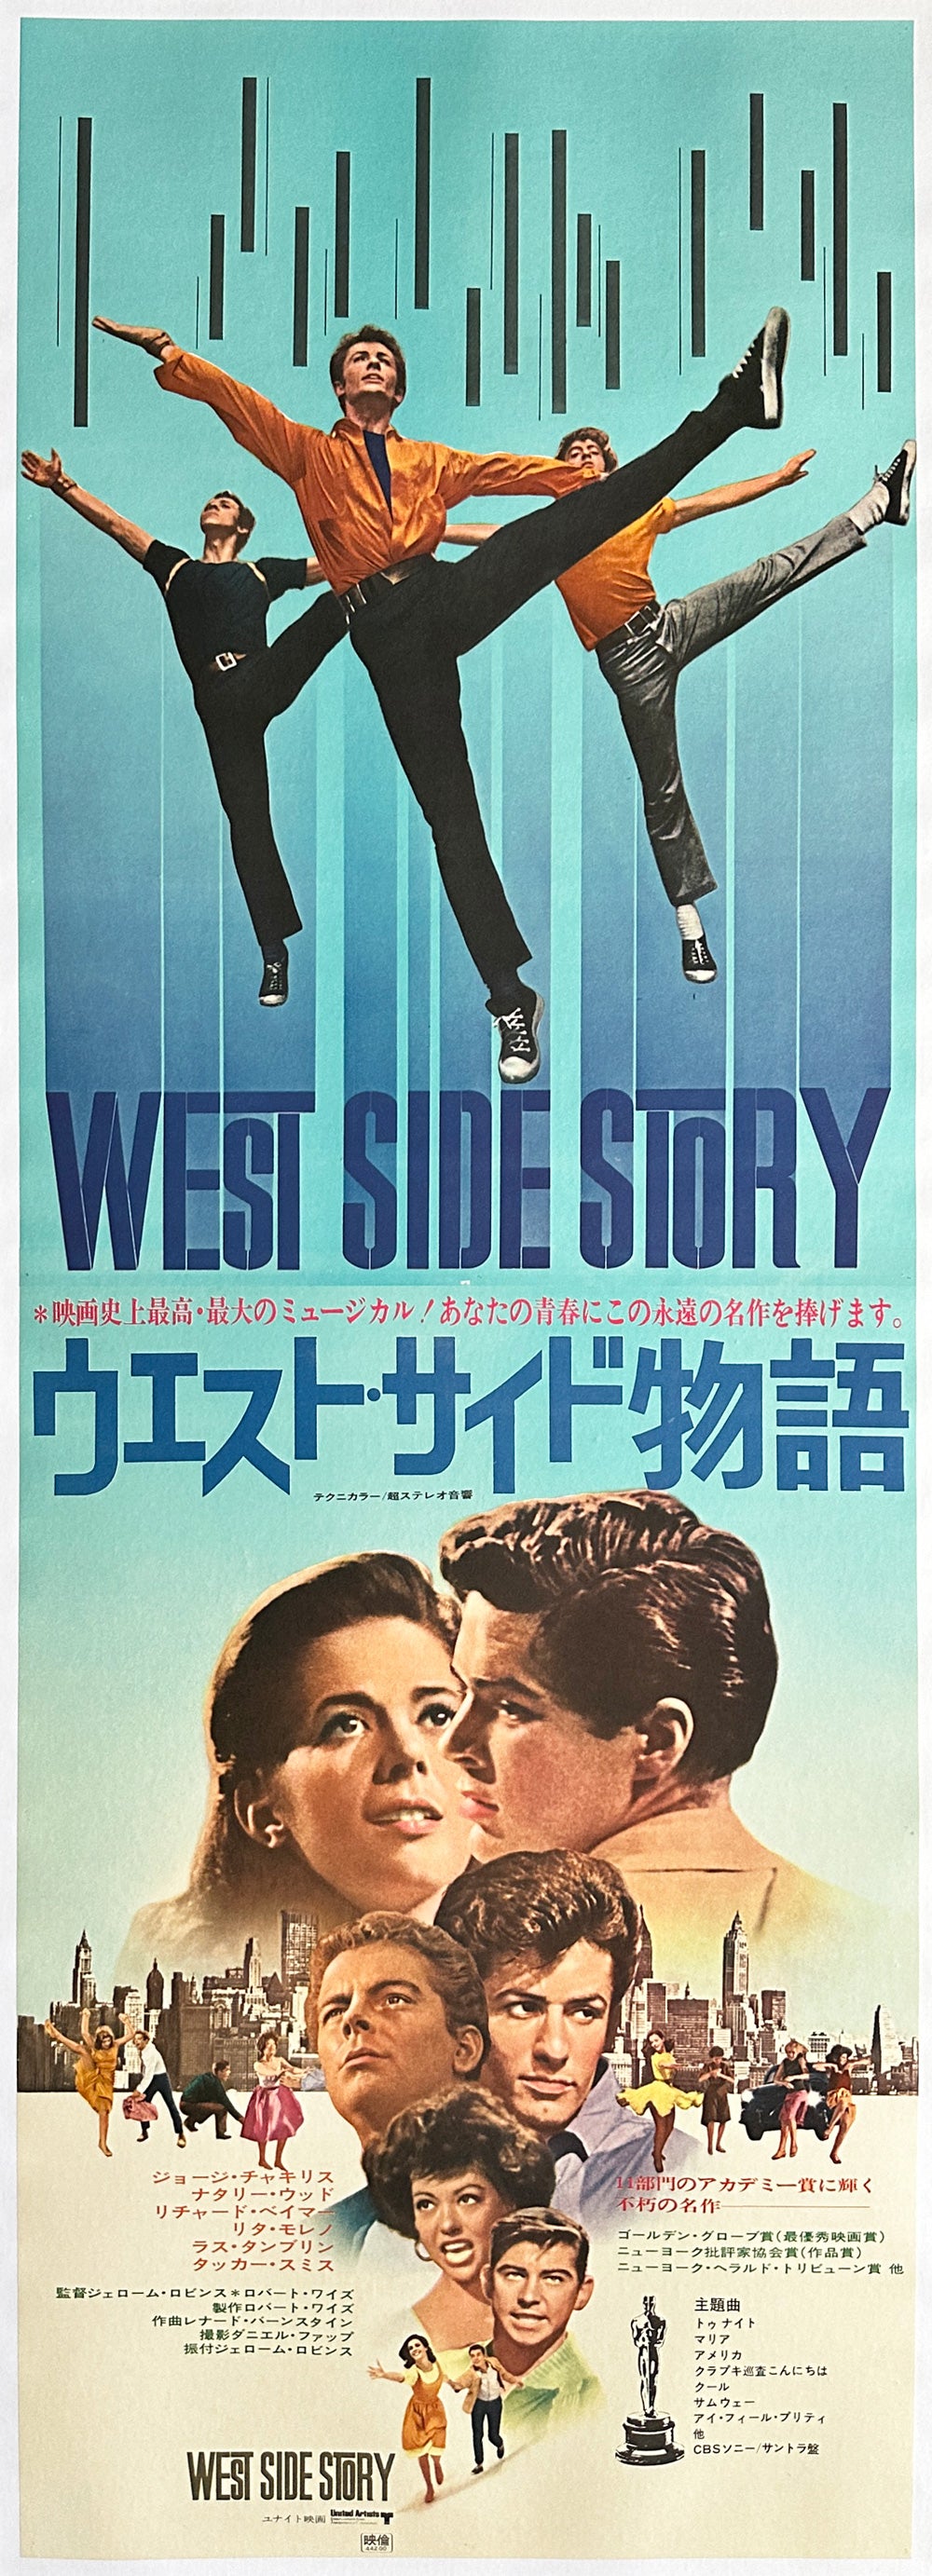 West Side Story R1969 Japanese 2 Sheet Film Movie Poster